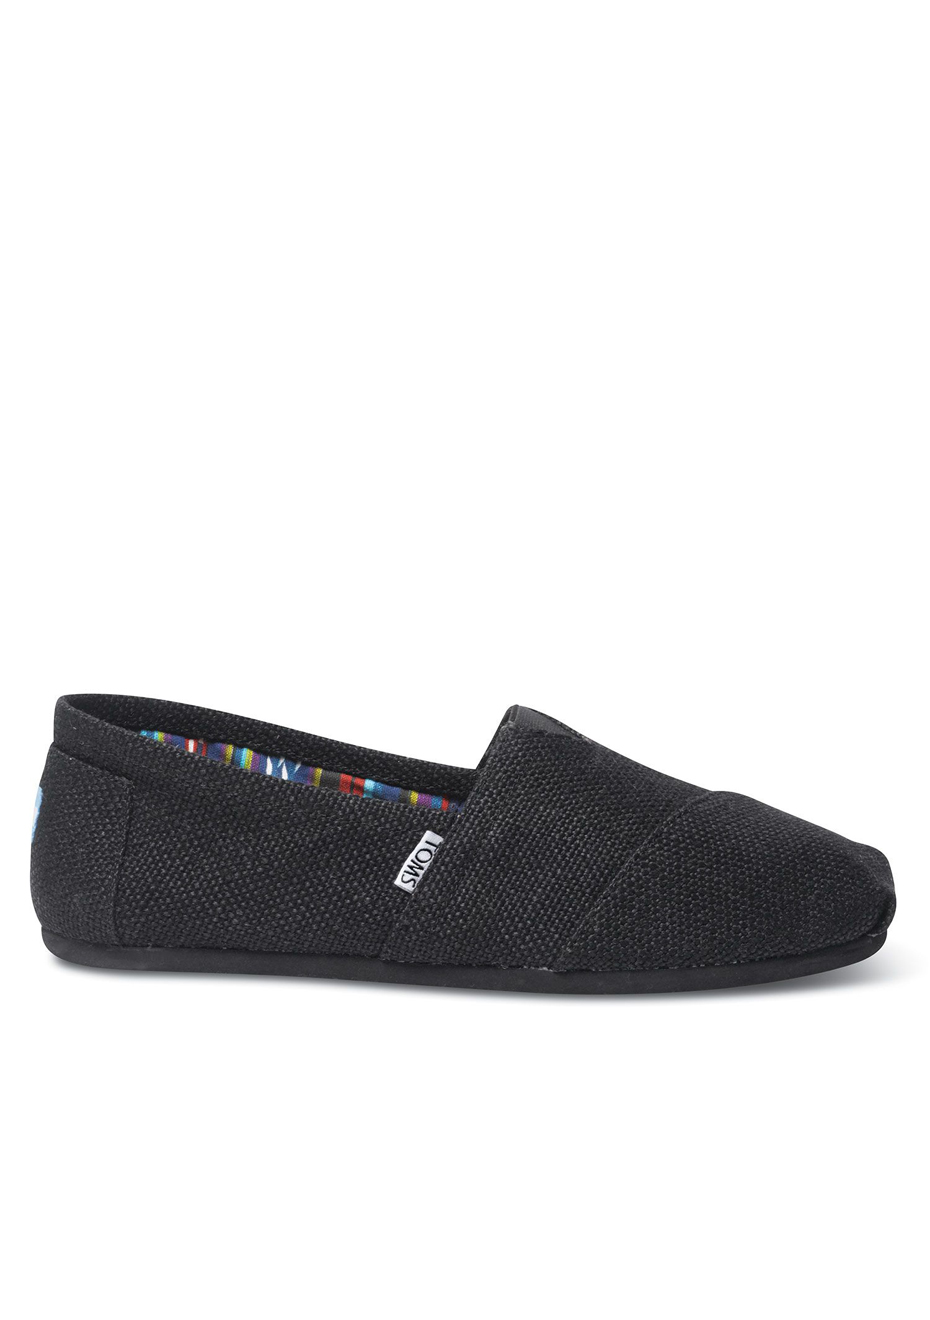 toms shoes mens clearance